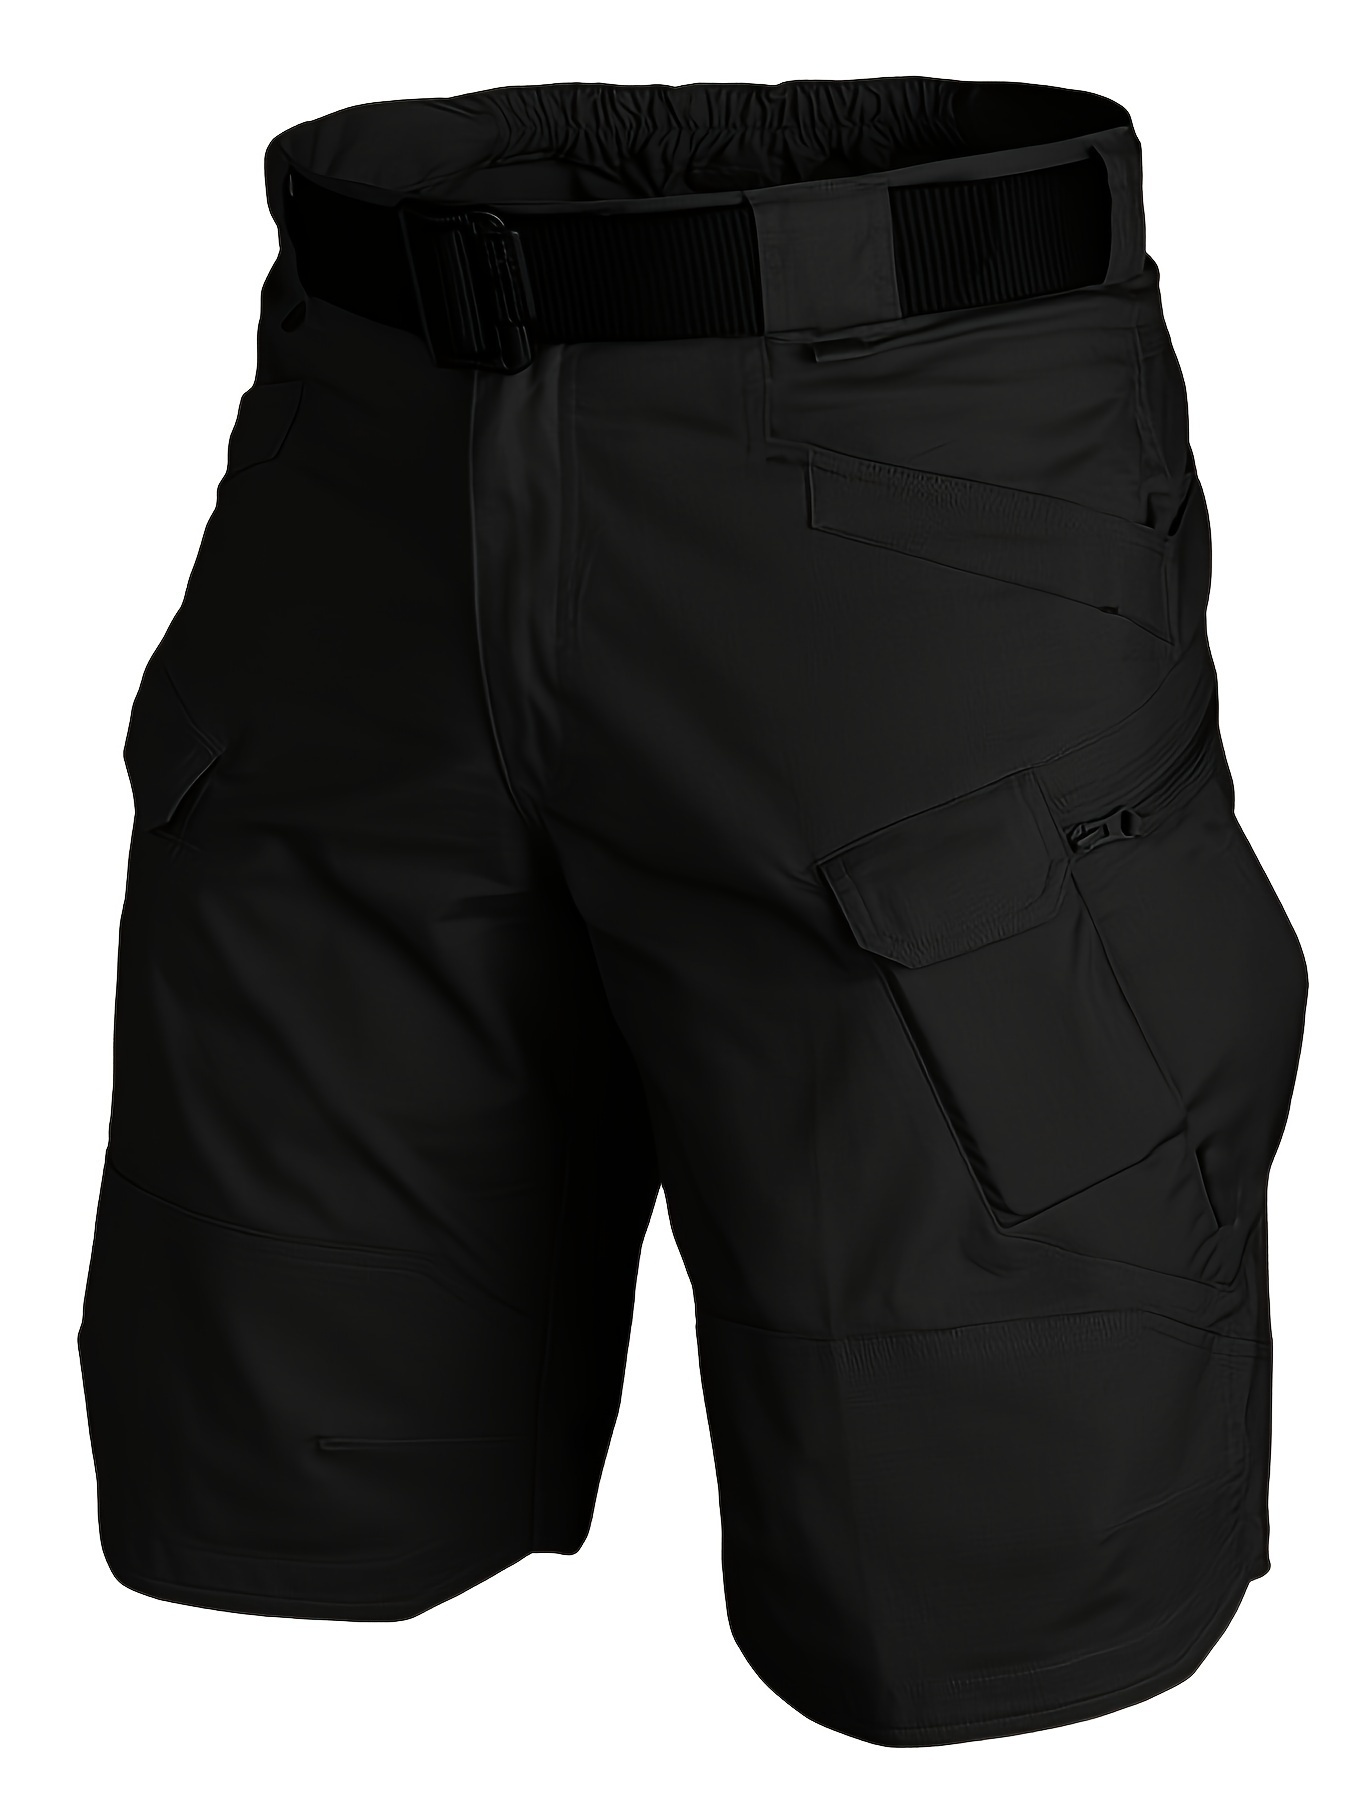 Clearance RYRJJ Cargo Shorts for Men Classic Relaxed Fit Lightweight Combat  Short Pants Multi-Pocket Outdoor Hiking Shorts(Black,XL) 